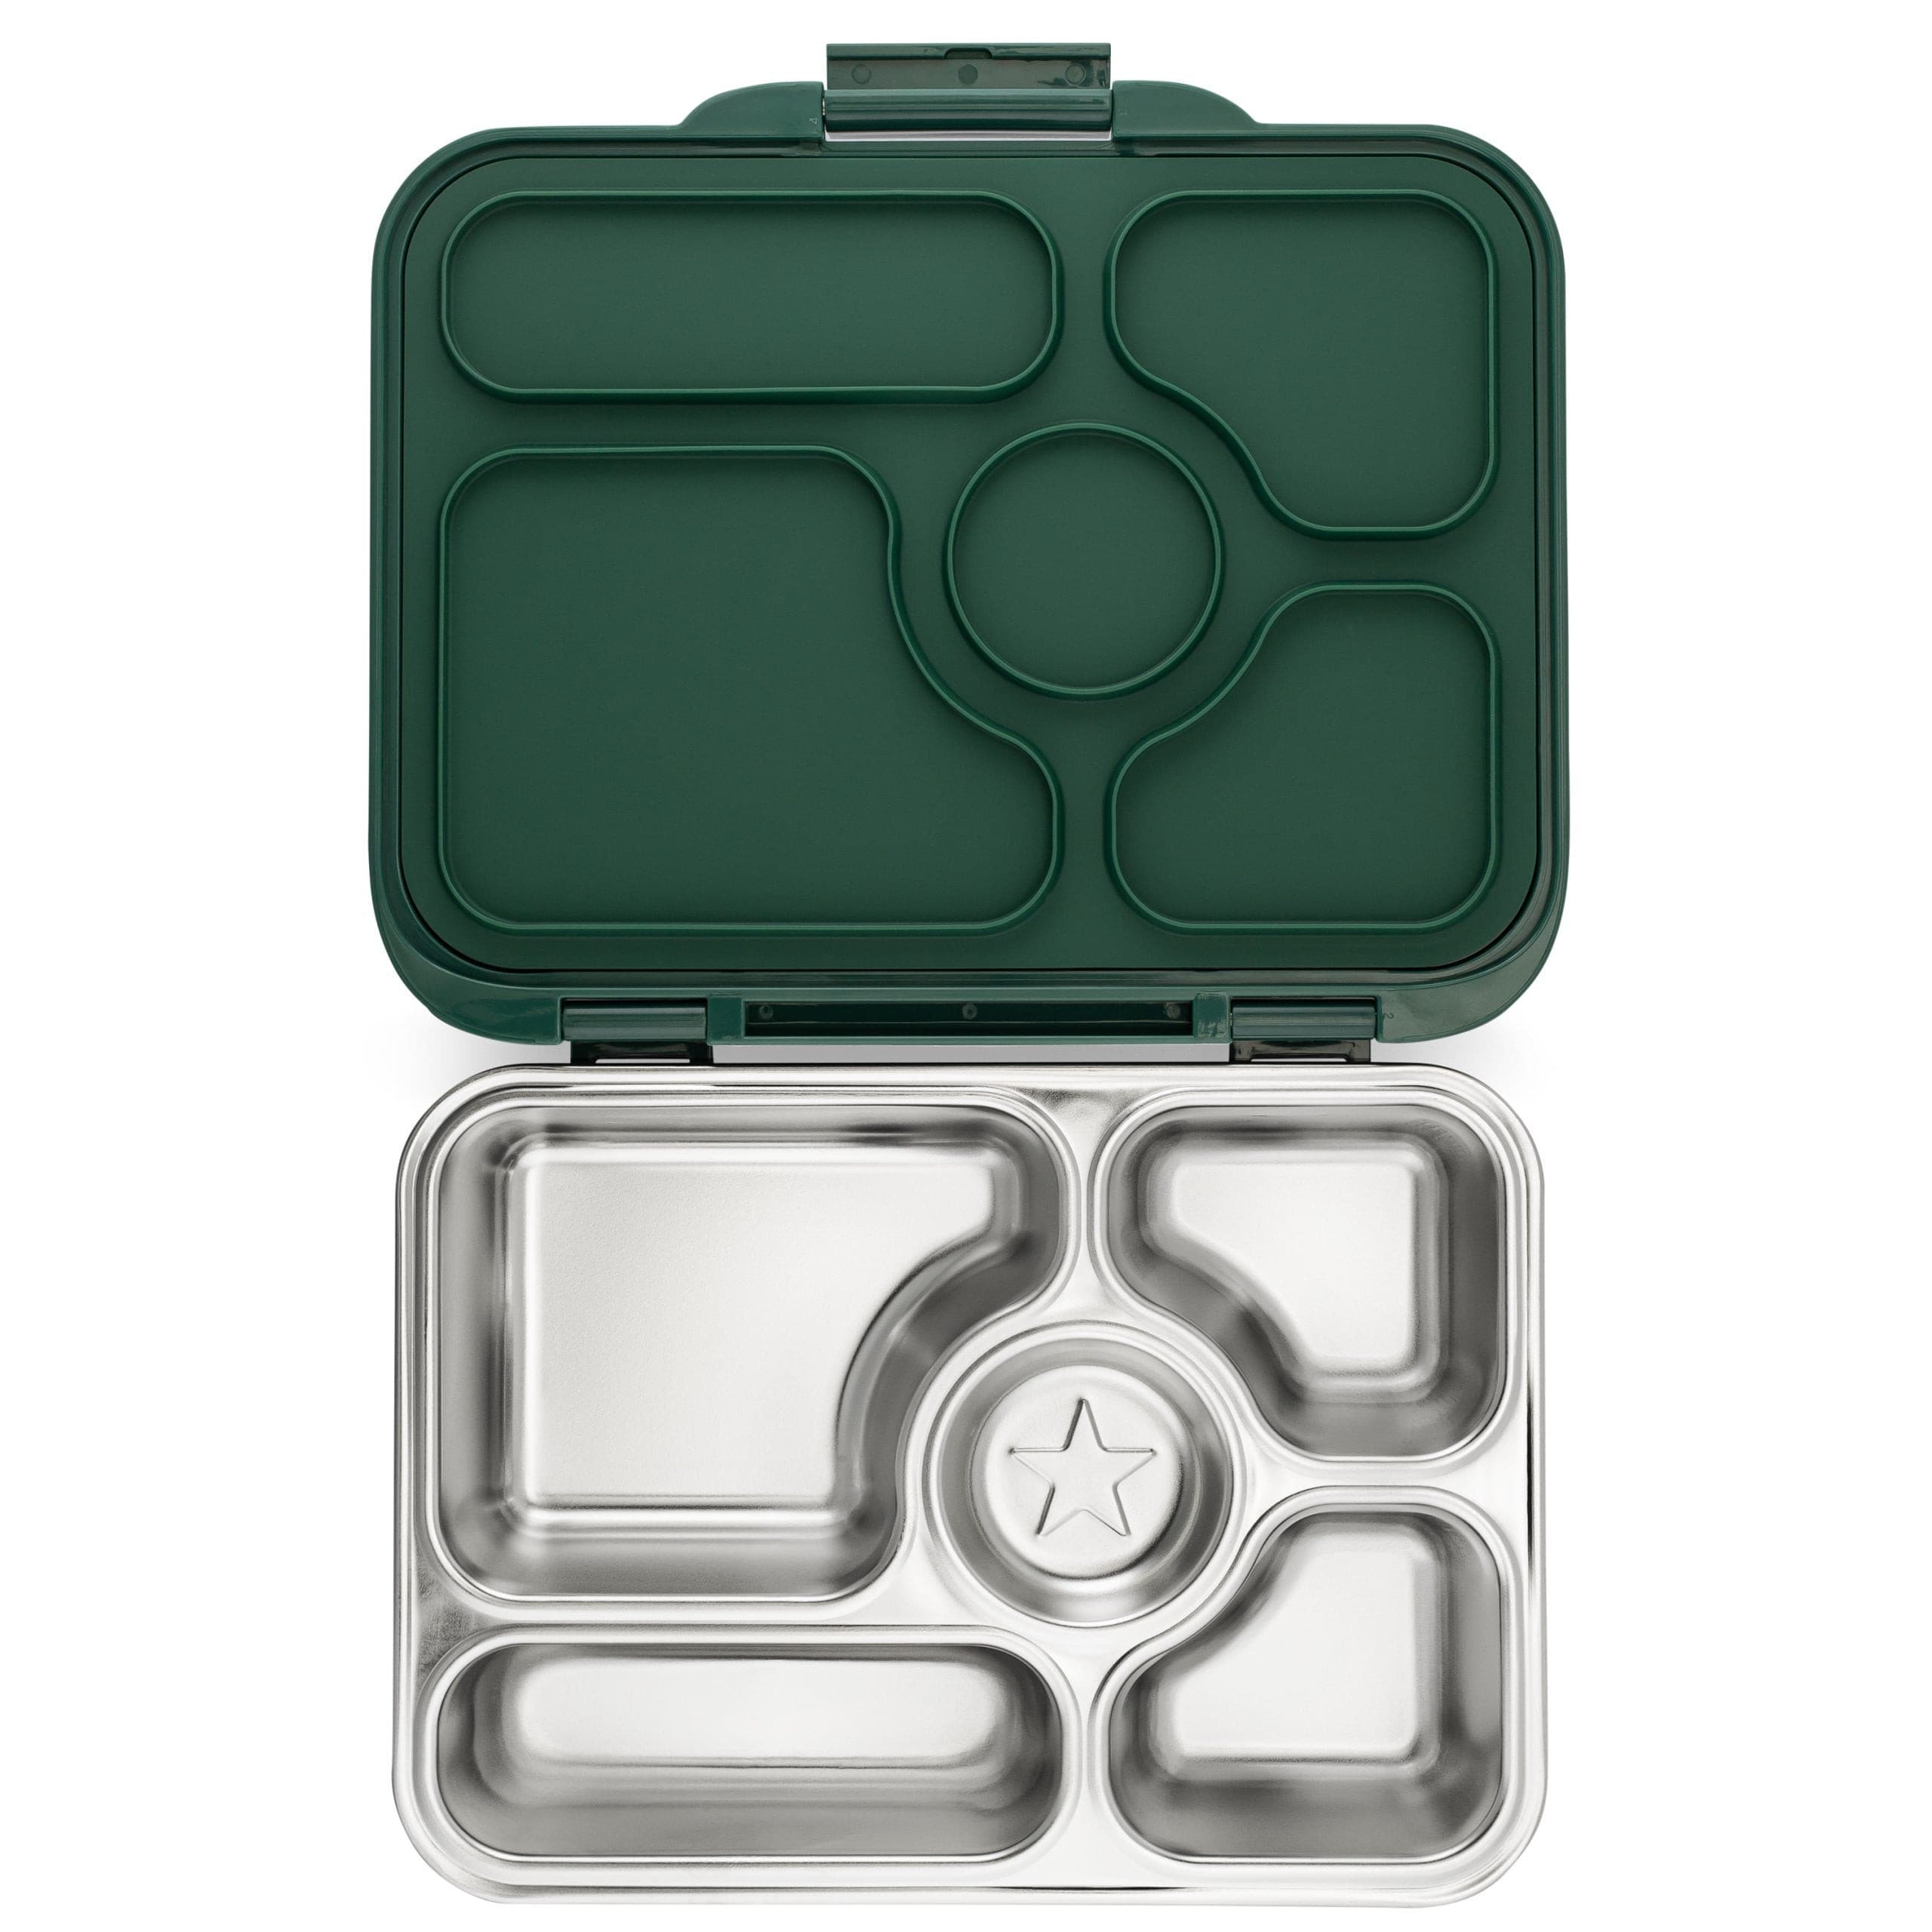 Yumbox Presto Stainless Steel Bento Lunch Box Kale Green Ocare Health&Beauty